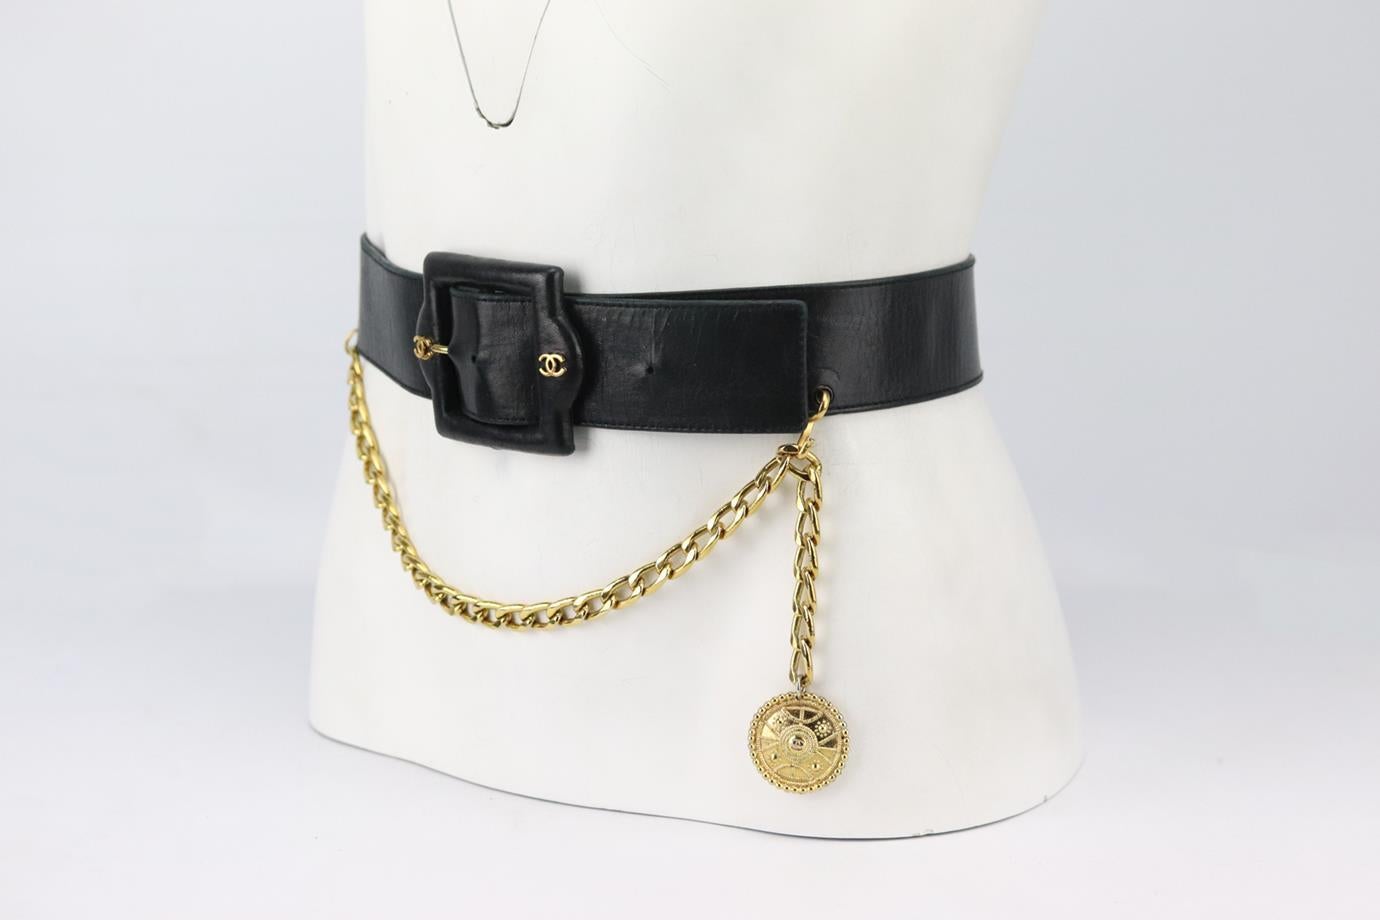 Chanel Vintage chain trimmed leather waist belt. Made from soft black leather with gold-tone chain and medallion detail at the front. Black. Buckle fastening at front. Size: XSmall (70 cm). Length Min: 26 in. Length Max: 30 in. Width: 1.7 in